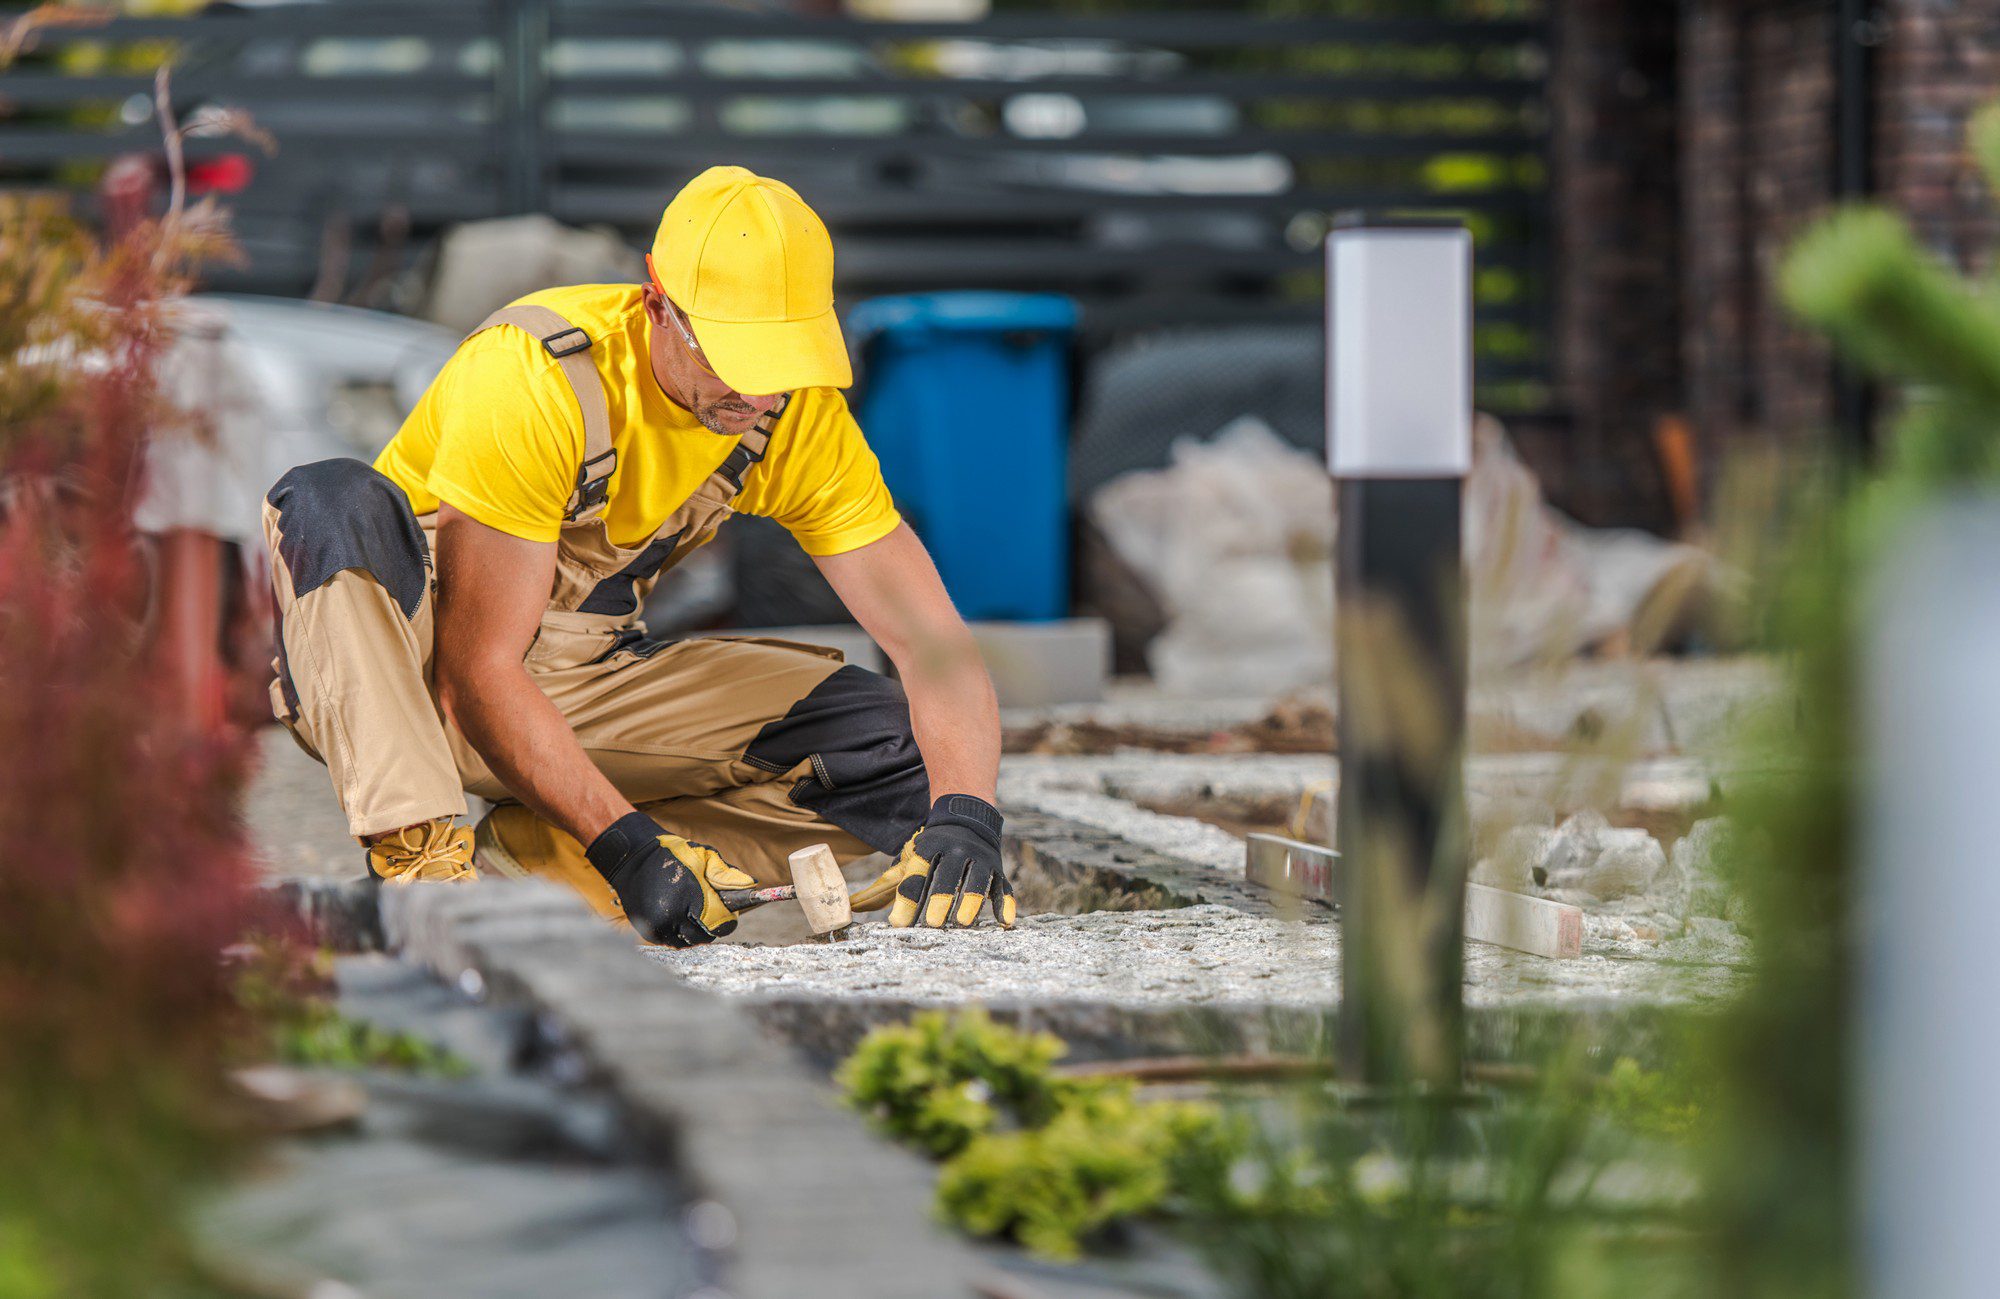 The image shows a person engaged in some sort of construction or landscaping work. The individual is wearing a yellow hard hat and a bright yellow shirt for visibility, which is typical work attire for construction workers. They also have on work gloves and utility pants with knee pads, indicating physical labour. The worker is kneeling down and setting blocks or bricks carefully into place, which suggests they might be working on paving or creating a pathway. In the background, there are some bags that likely contain construction materials and a blue wheelie bin, possibly for waste or additional materials. The focus is on the worker, with plants slightly blurred in the foreground and the background slightly out of focus, creating depth and emphasizing the work in progress.